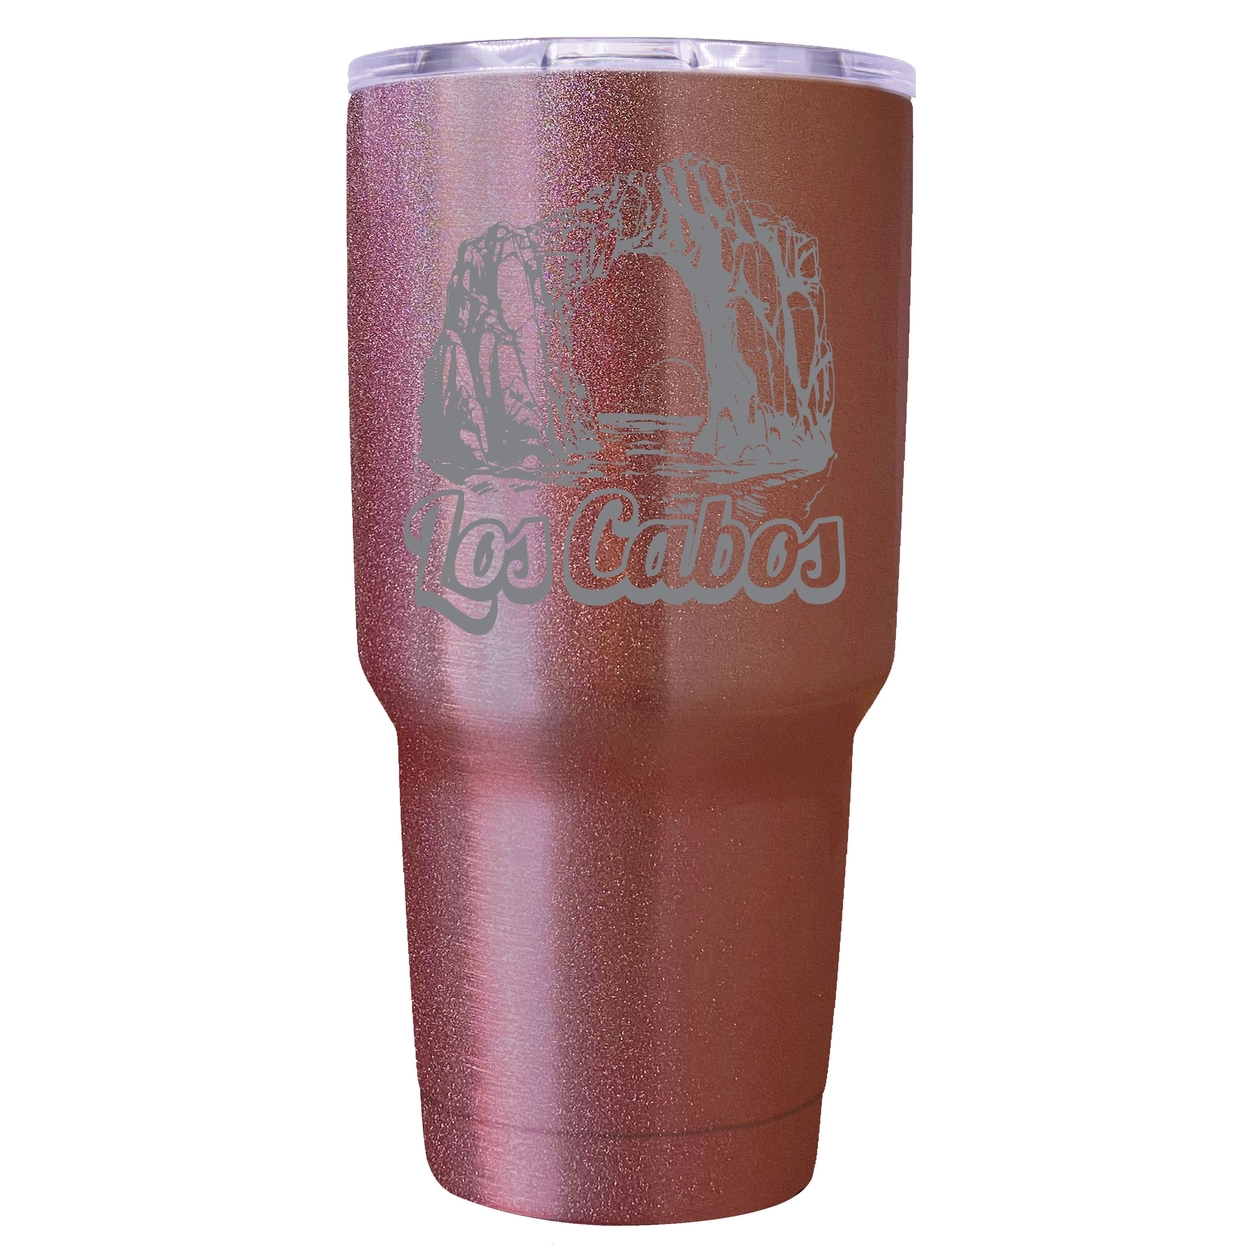 Los Cabos Mexico Souvenir 24 Oz Engraved Insulated Stainless Steel Tumbler - Rose Gold,,4-Pack